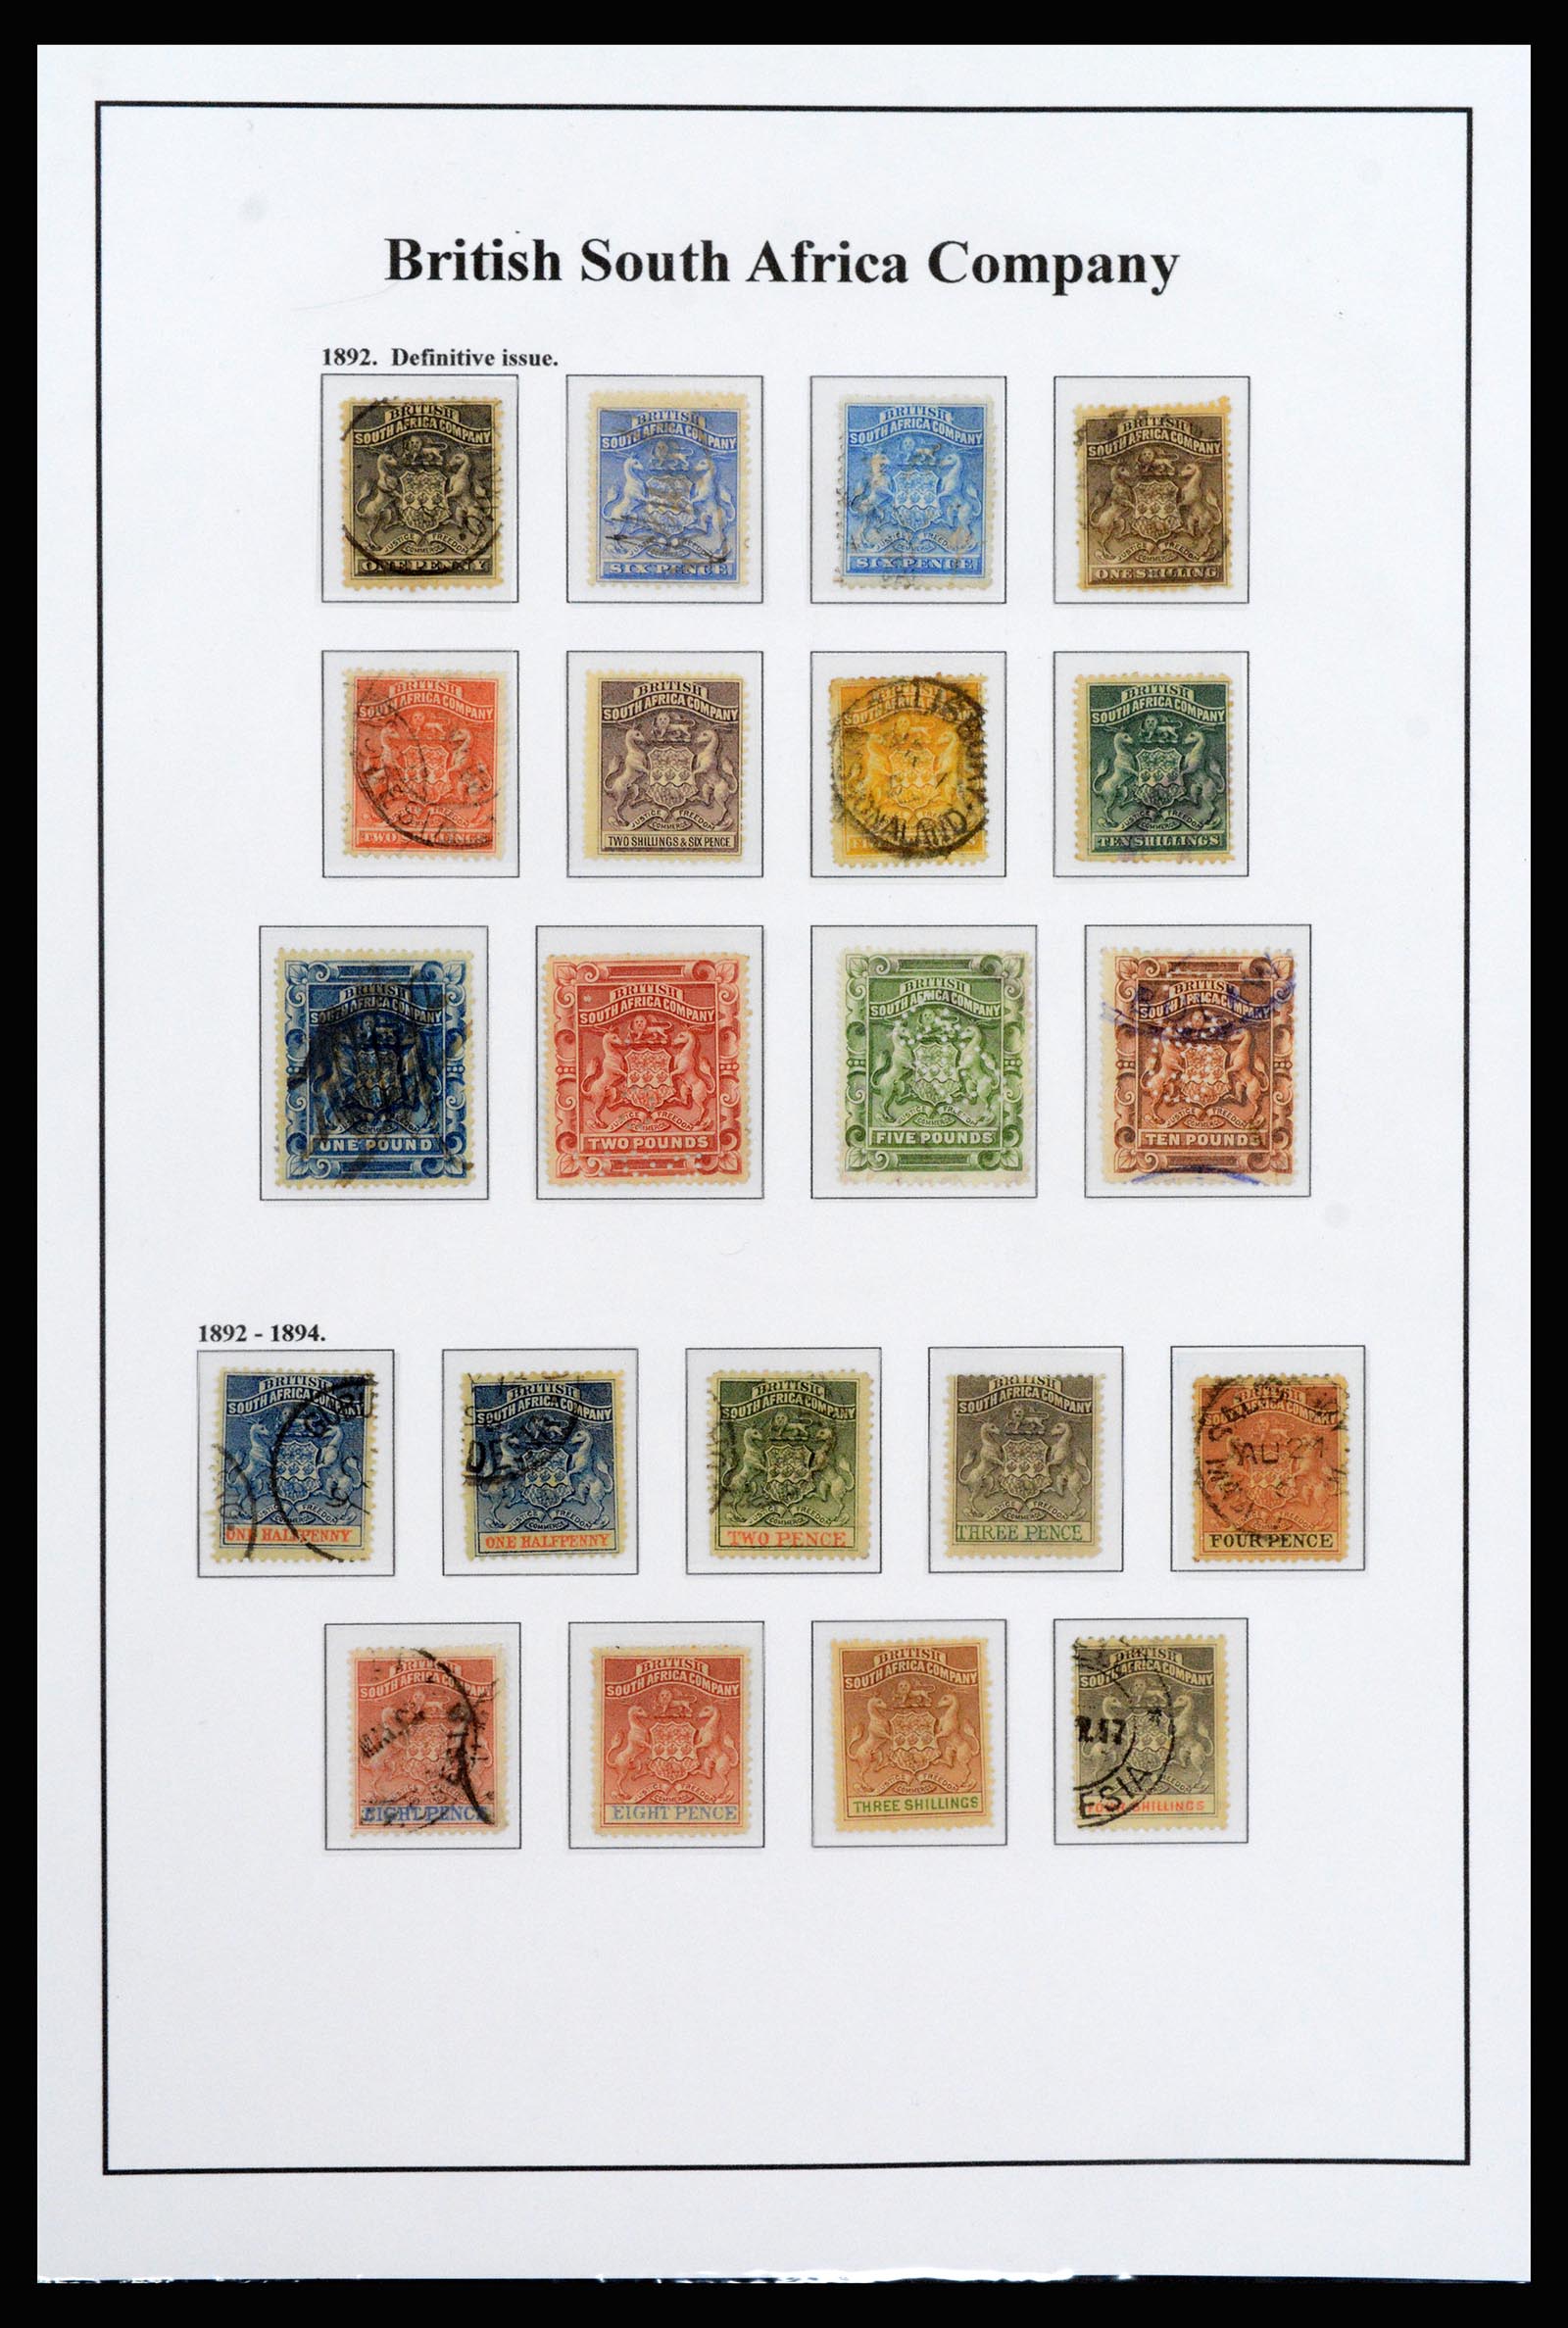 37245 001 - Stamp collection 37245 British Commonwealth 1885-1966.